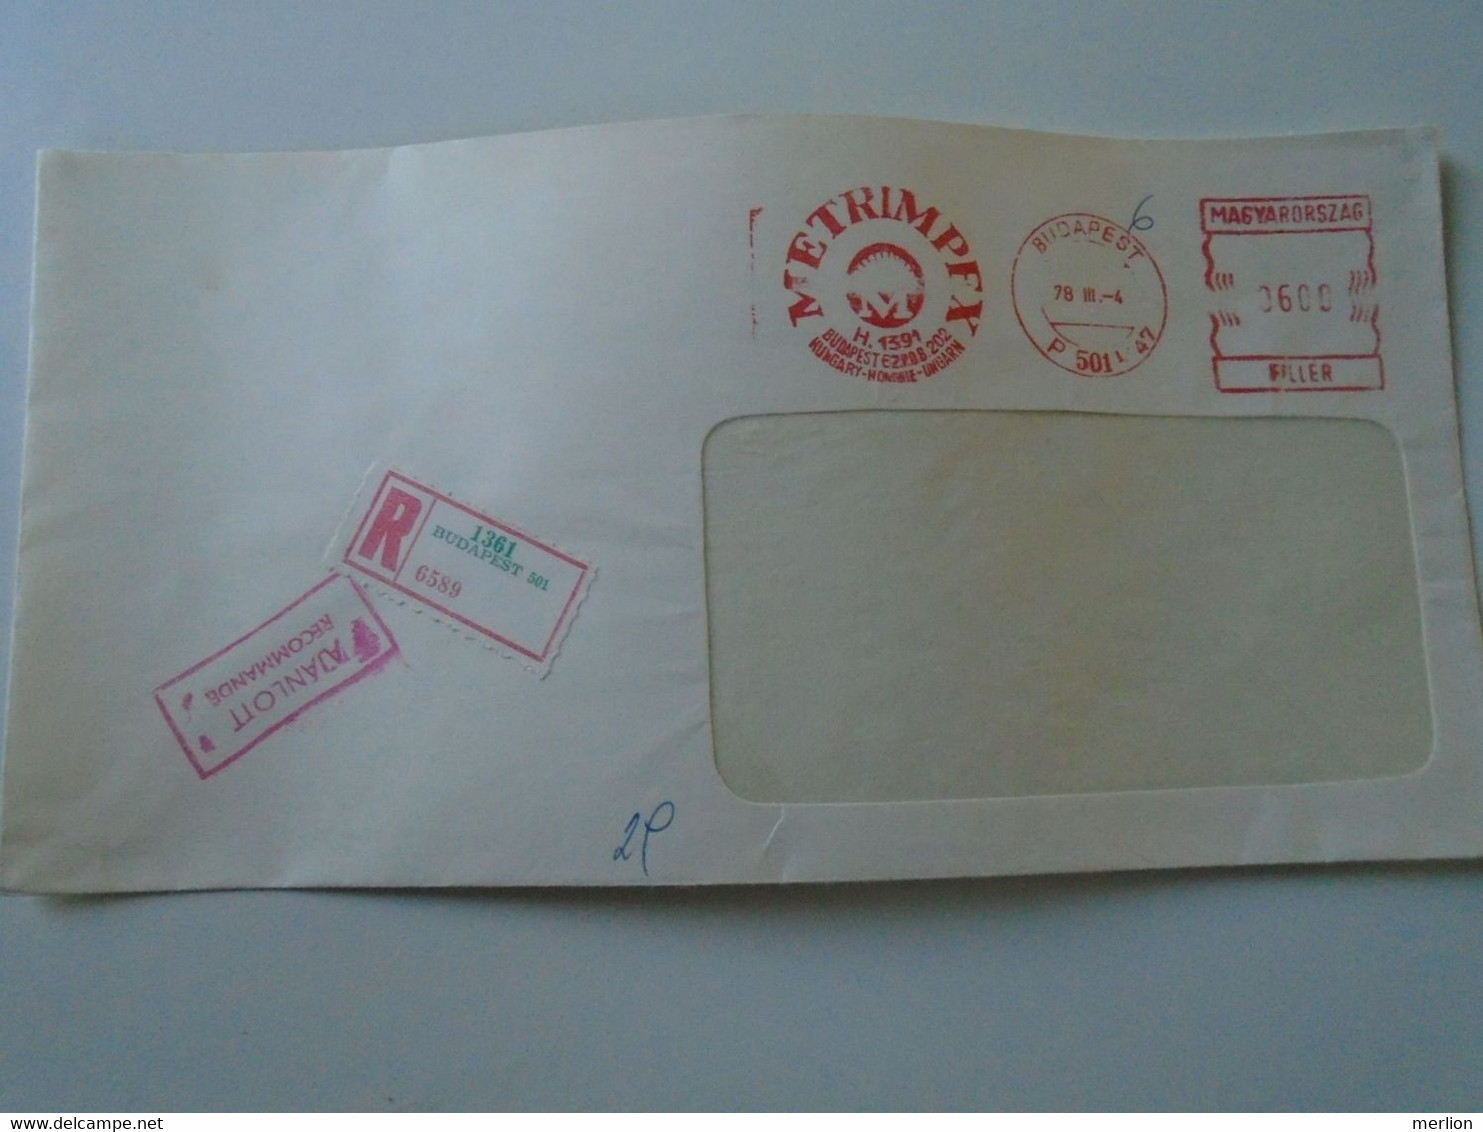 AD00012.52   Hungary Registered  Cover -EMA Red Meter Freistempel-1978 Metrimpex Budapest - Automatenmarken [ATM]